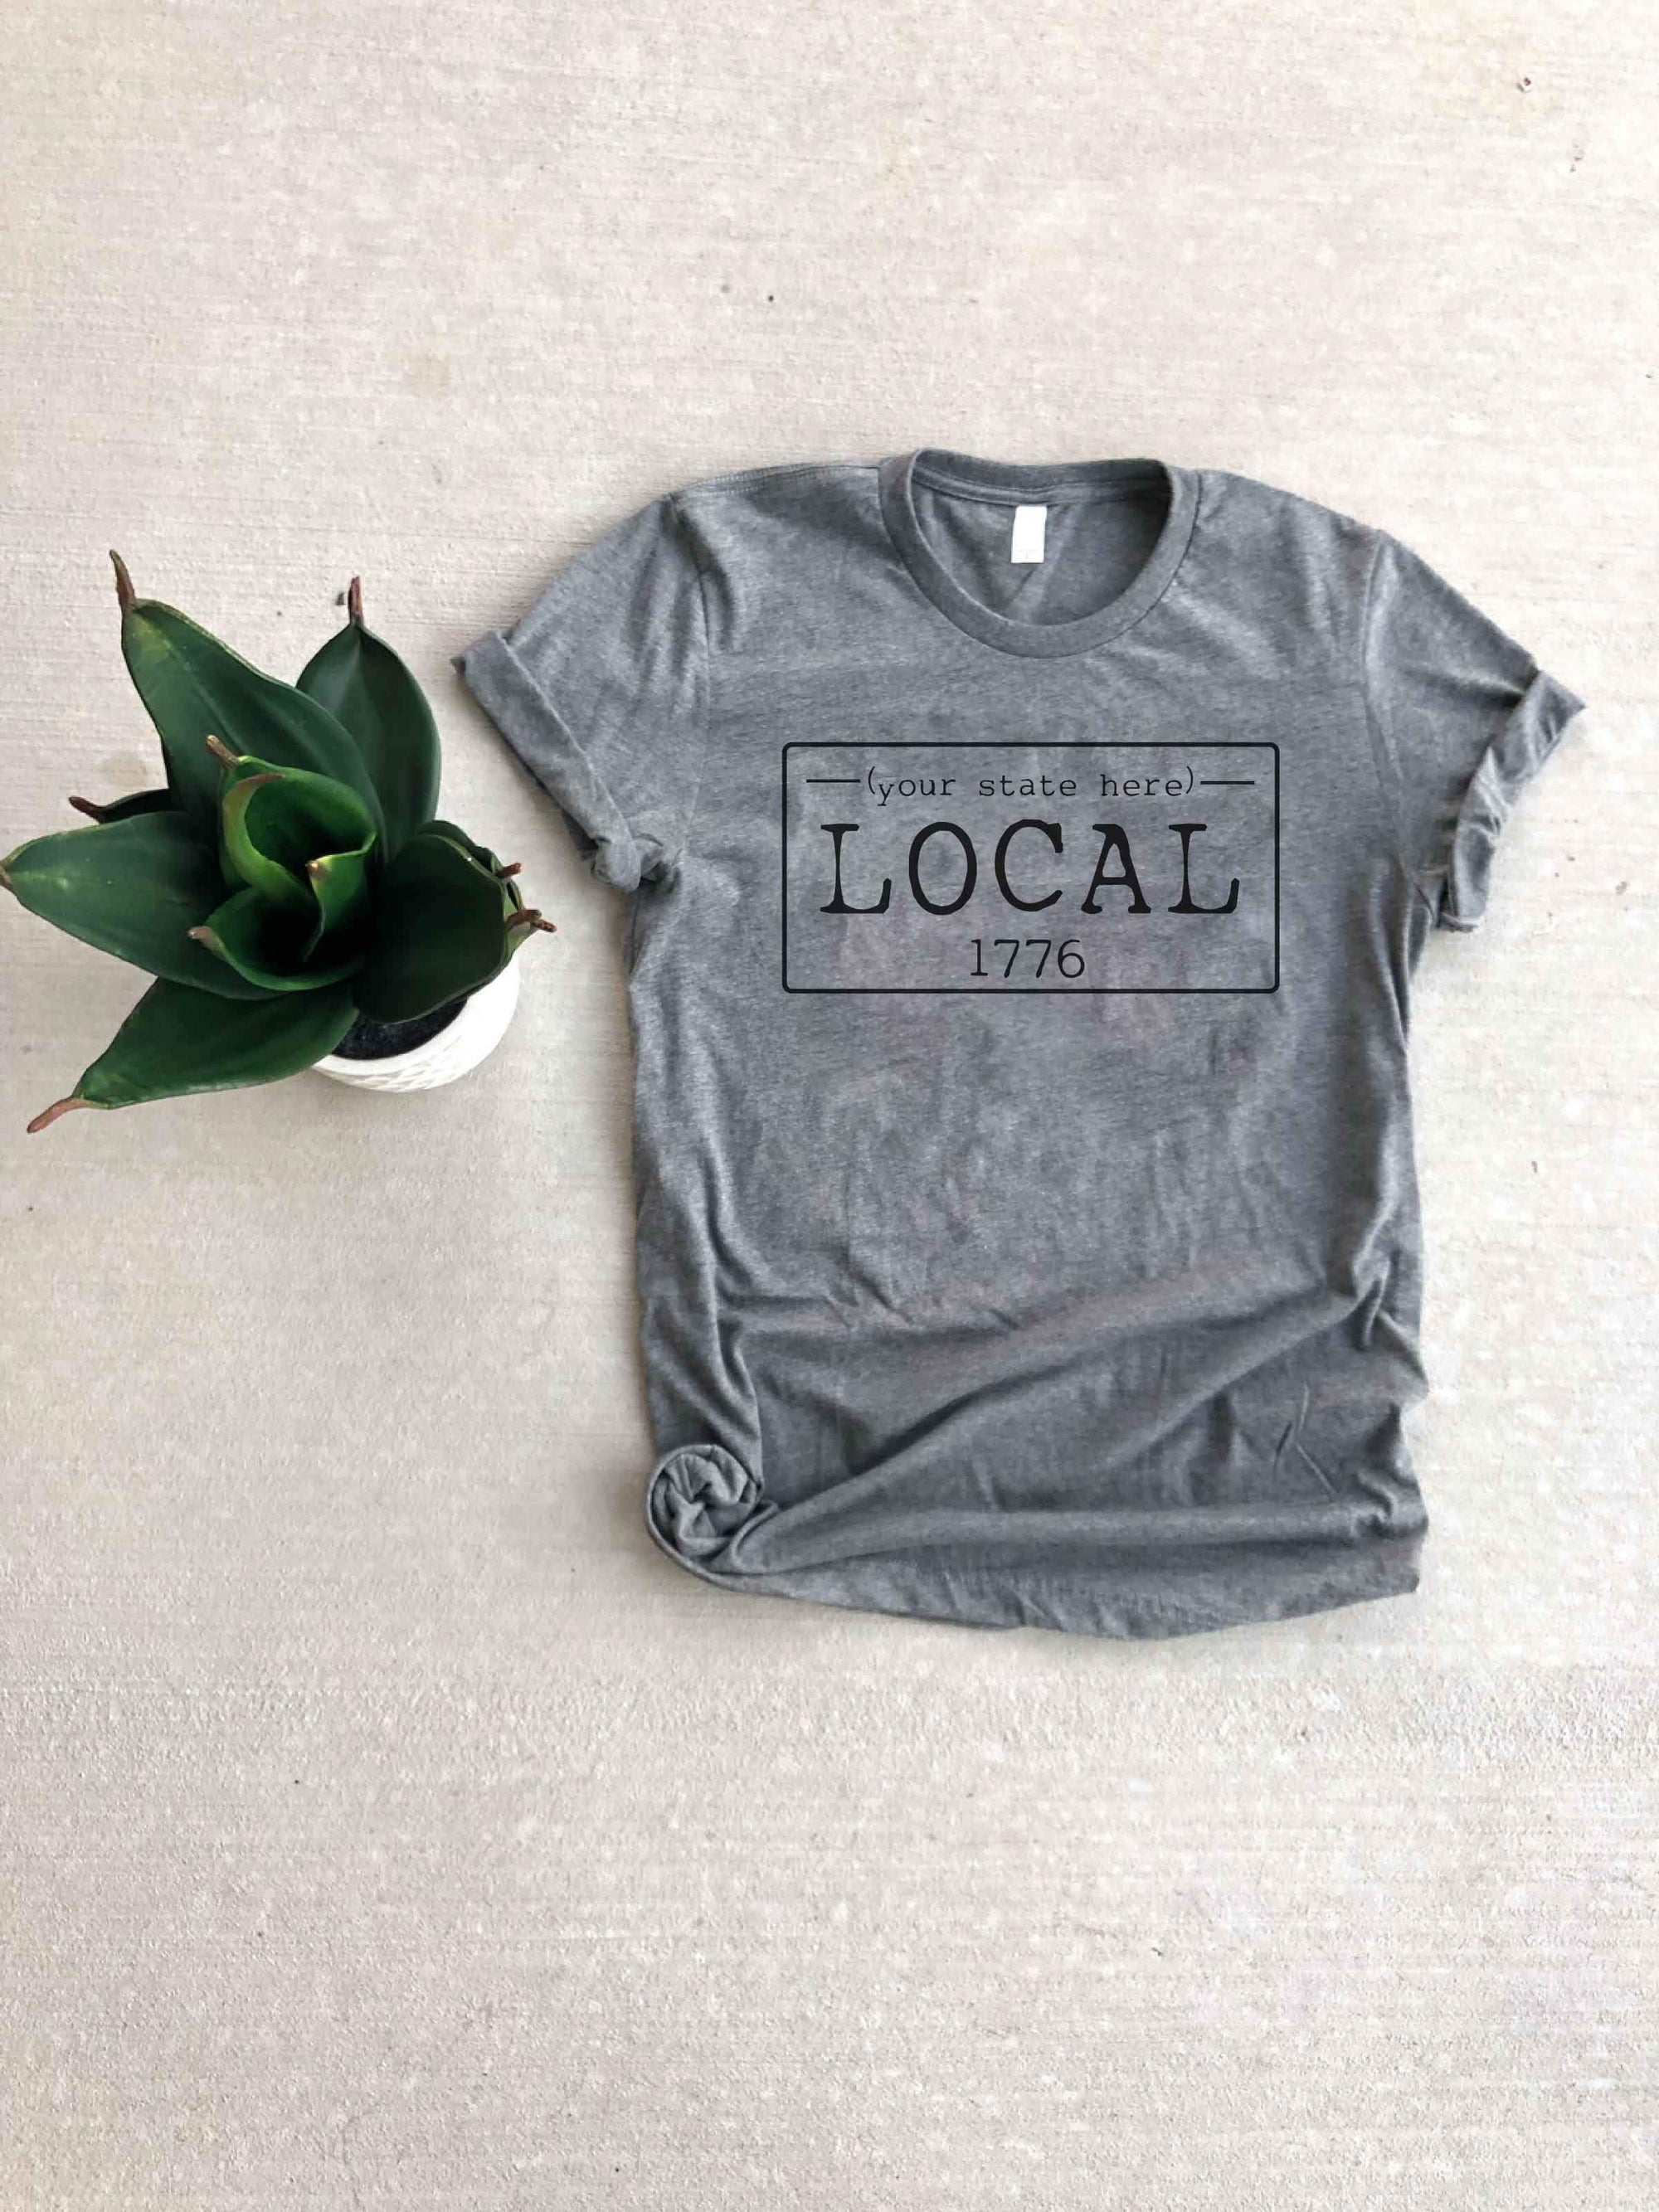 Local license plate state tee- M-N Short sleeve state tee Bella Canvas 3001 natural and deep heather XS Cream Michigan